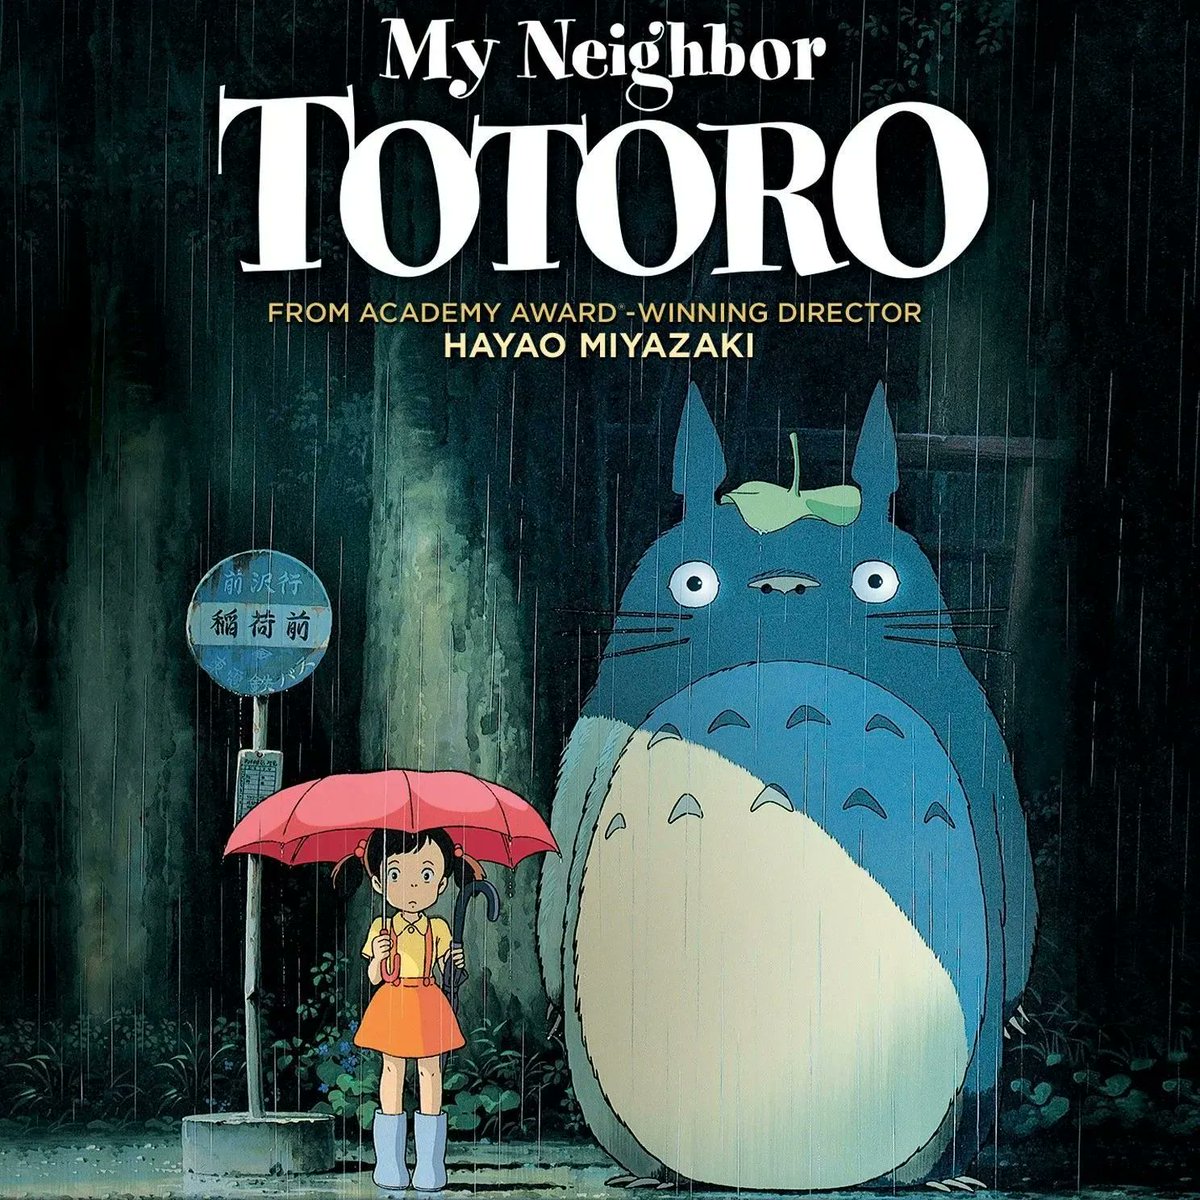 A Miyazaki masterpiece in 35mm! The English dubbed version of MY NEIGHBOR TOTORO (1988) screens today & tomorrow, Saturday & Sunday September 17th & 18th, at 2:00pm.